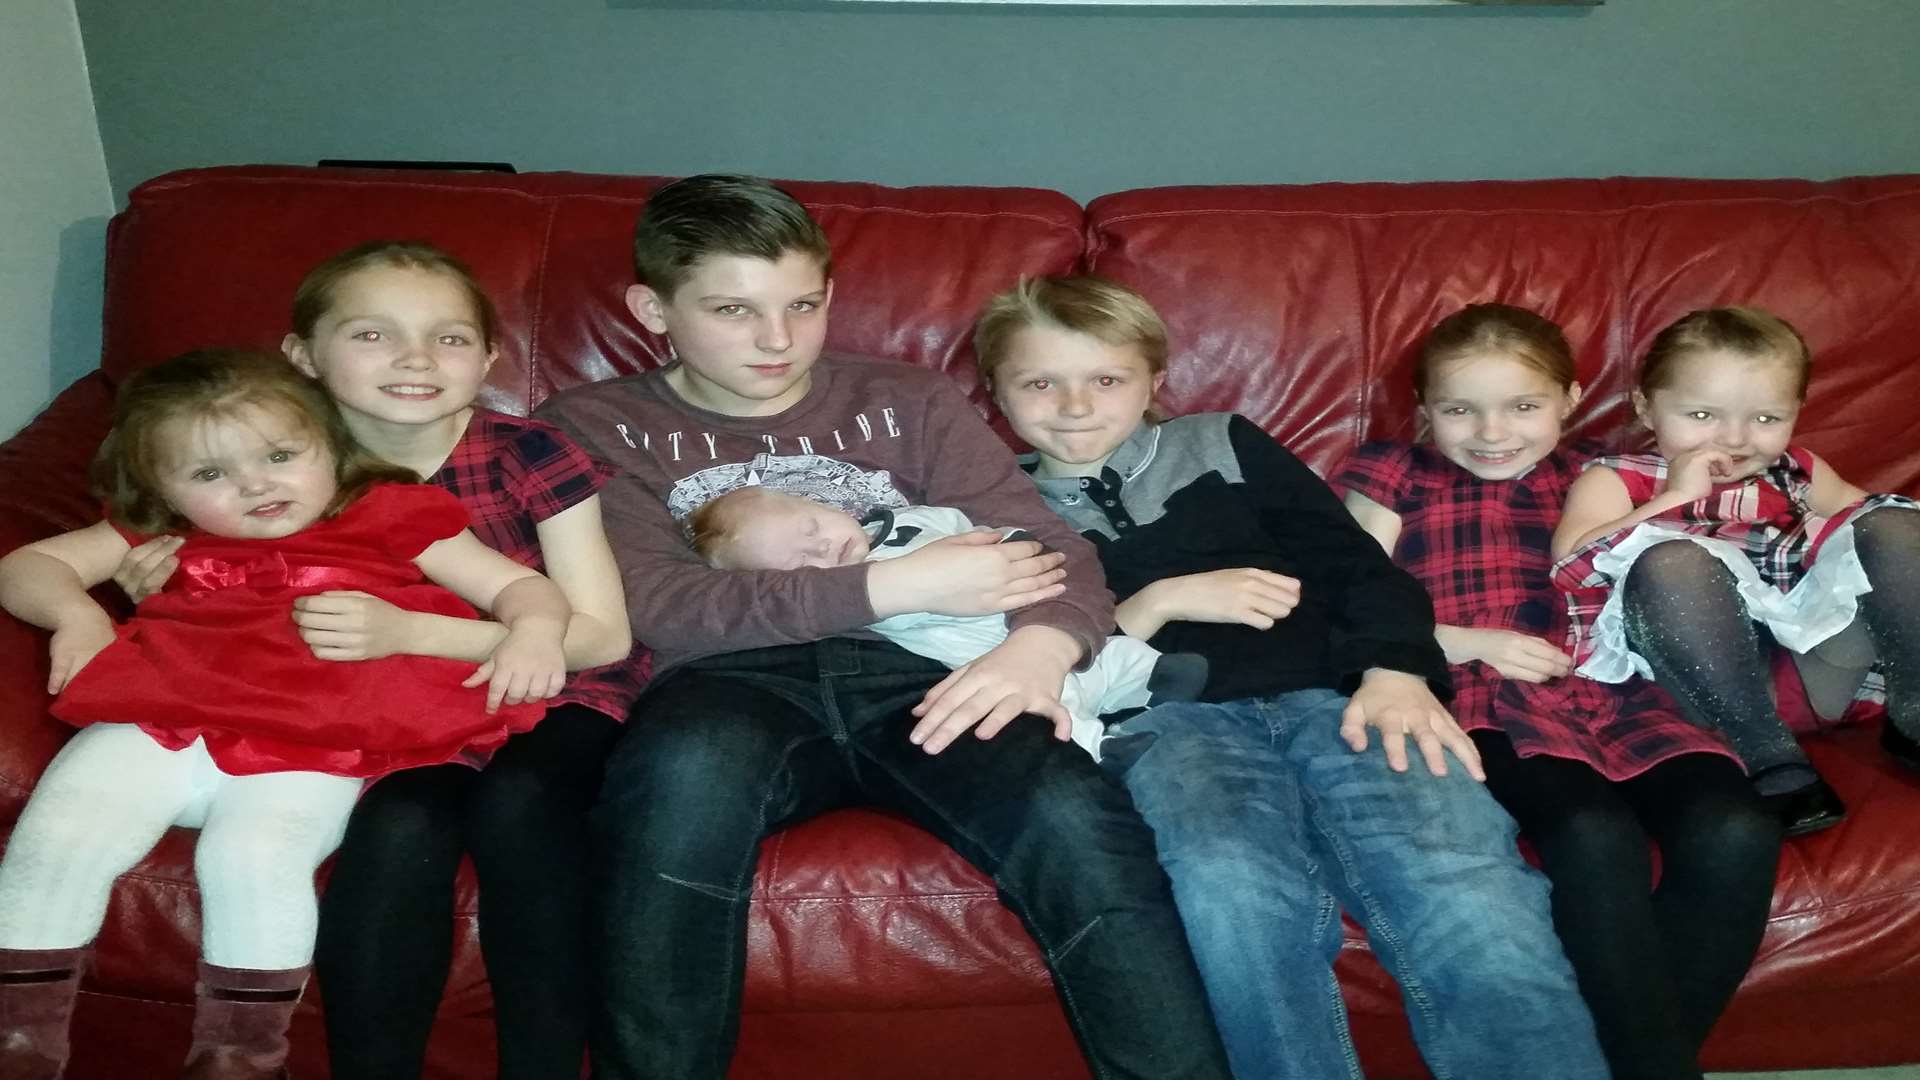 The Woodgate children: (left to right) Darcy, Amelia, Ethan, George, David, Madison and Isabella